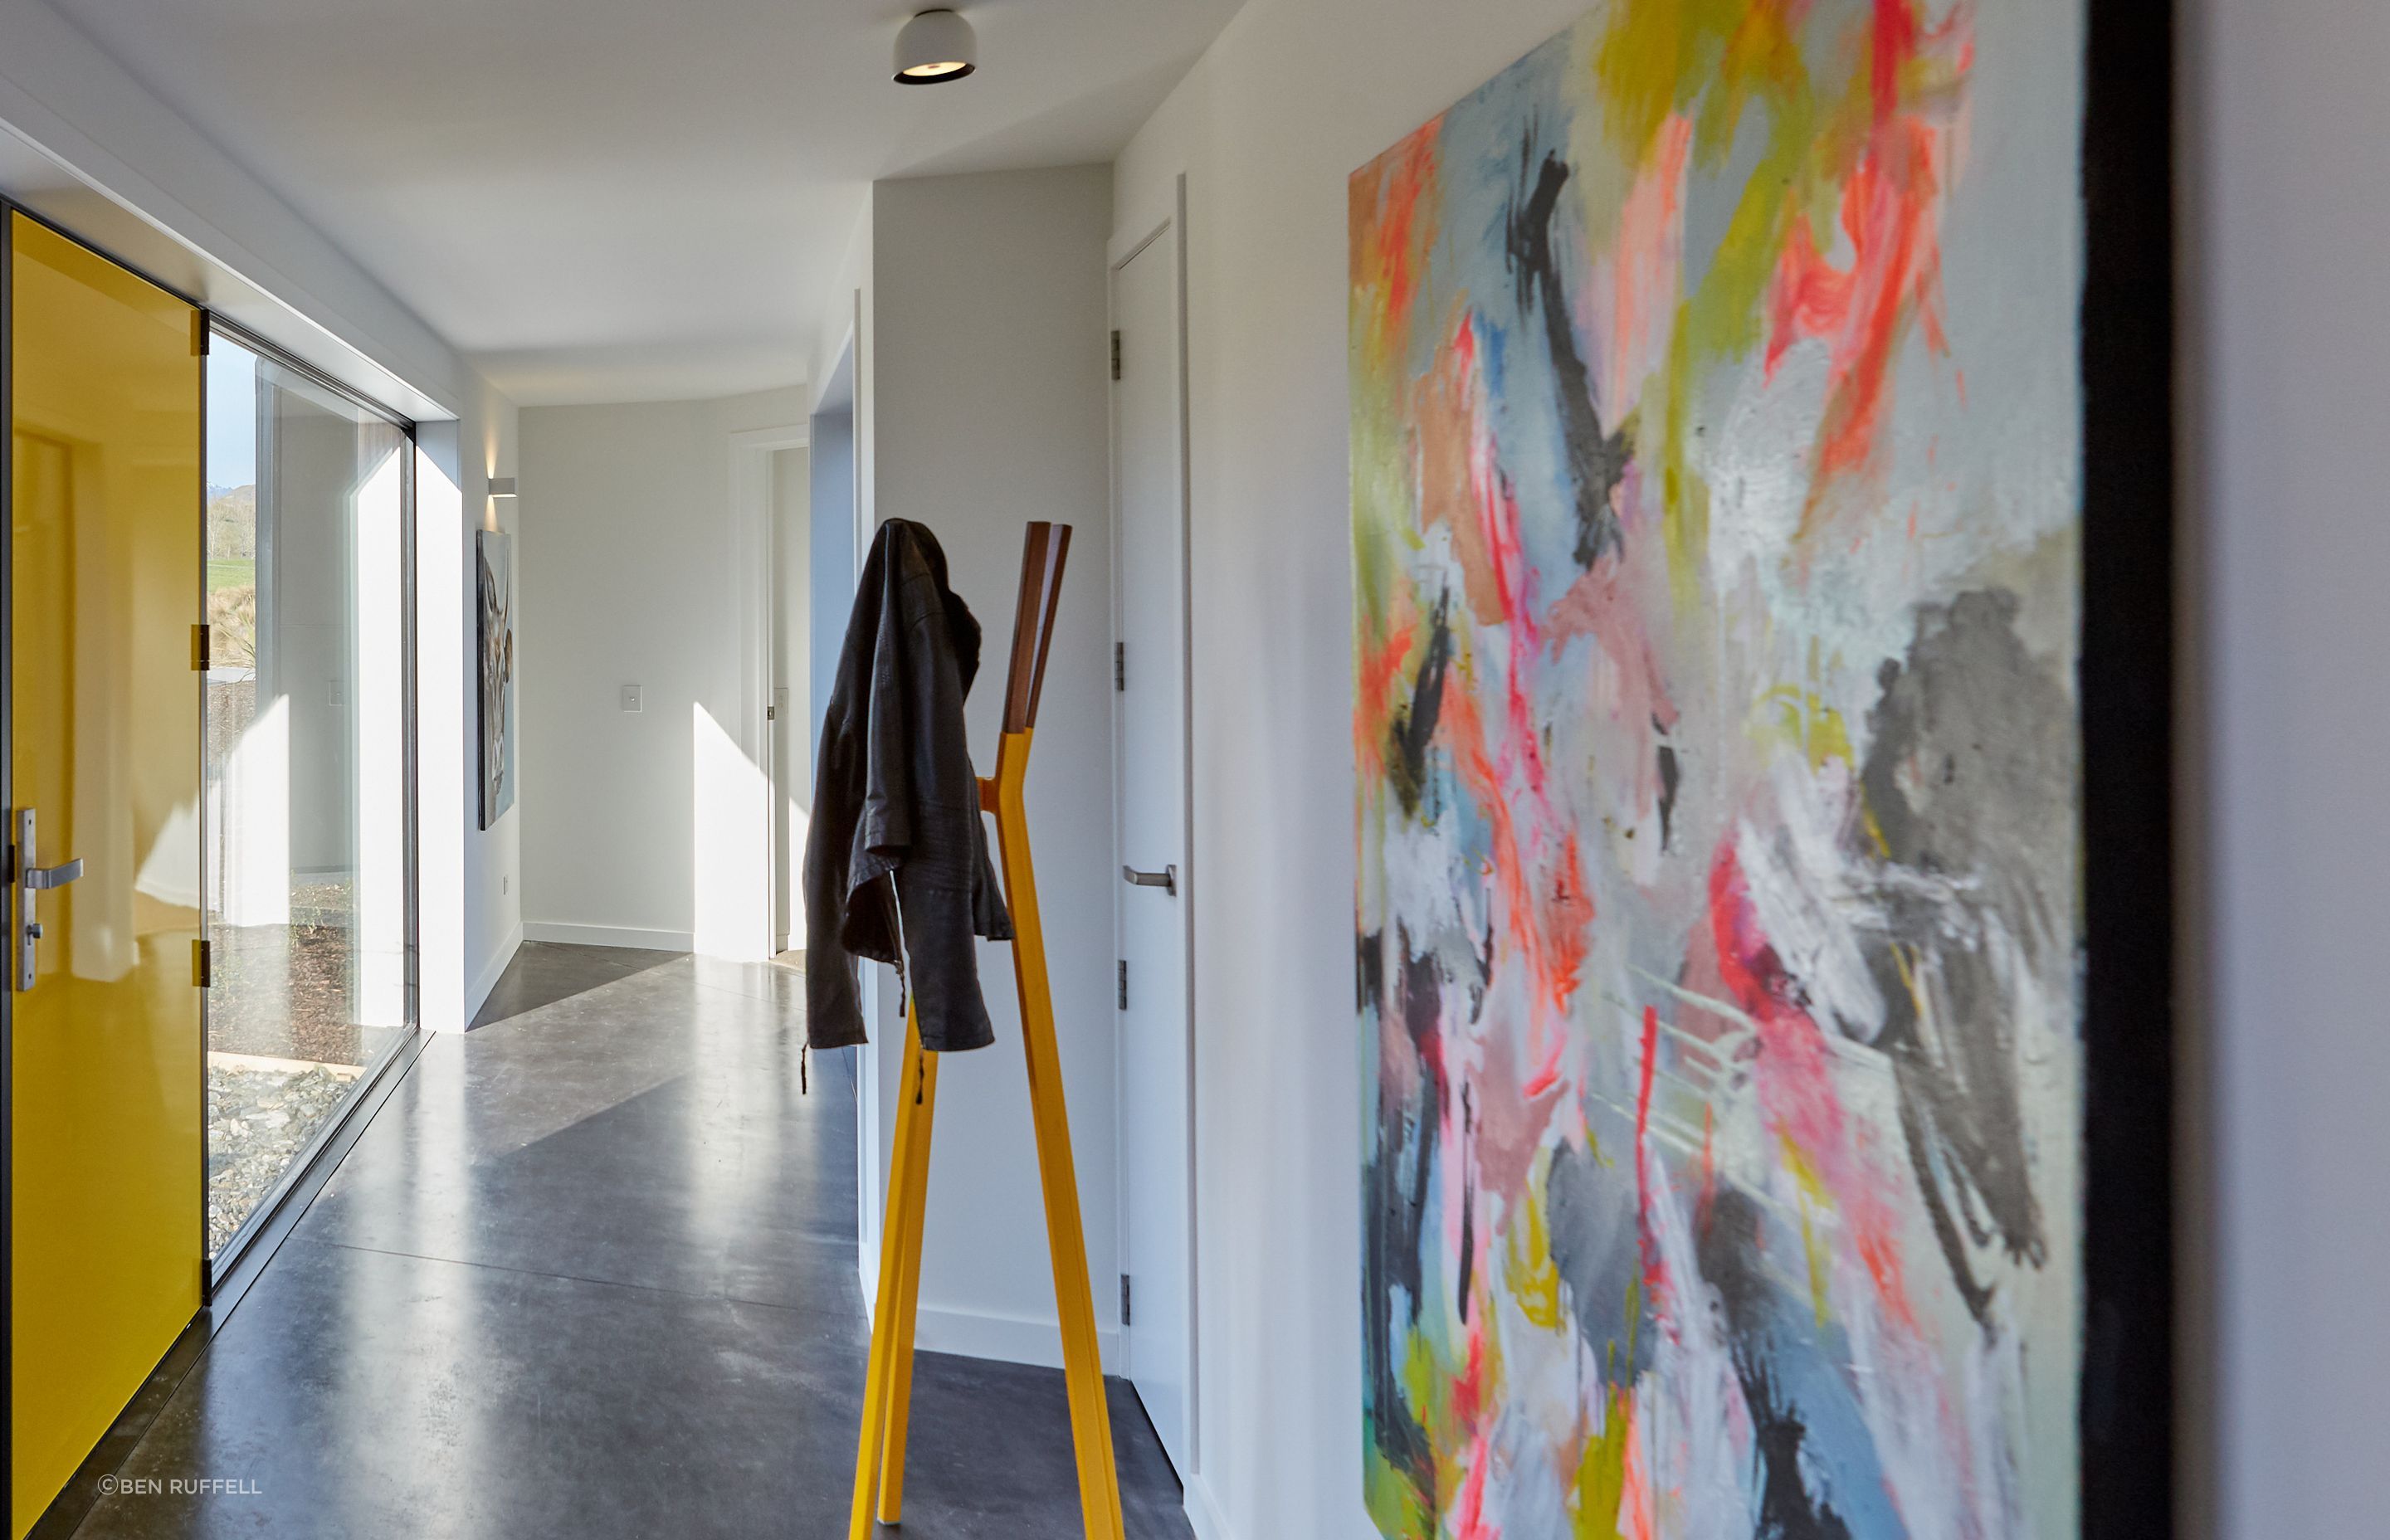 Quirky elements and pops of colour juxtapose the neutral base palette and concrete floors.